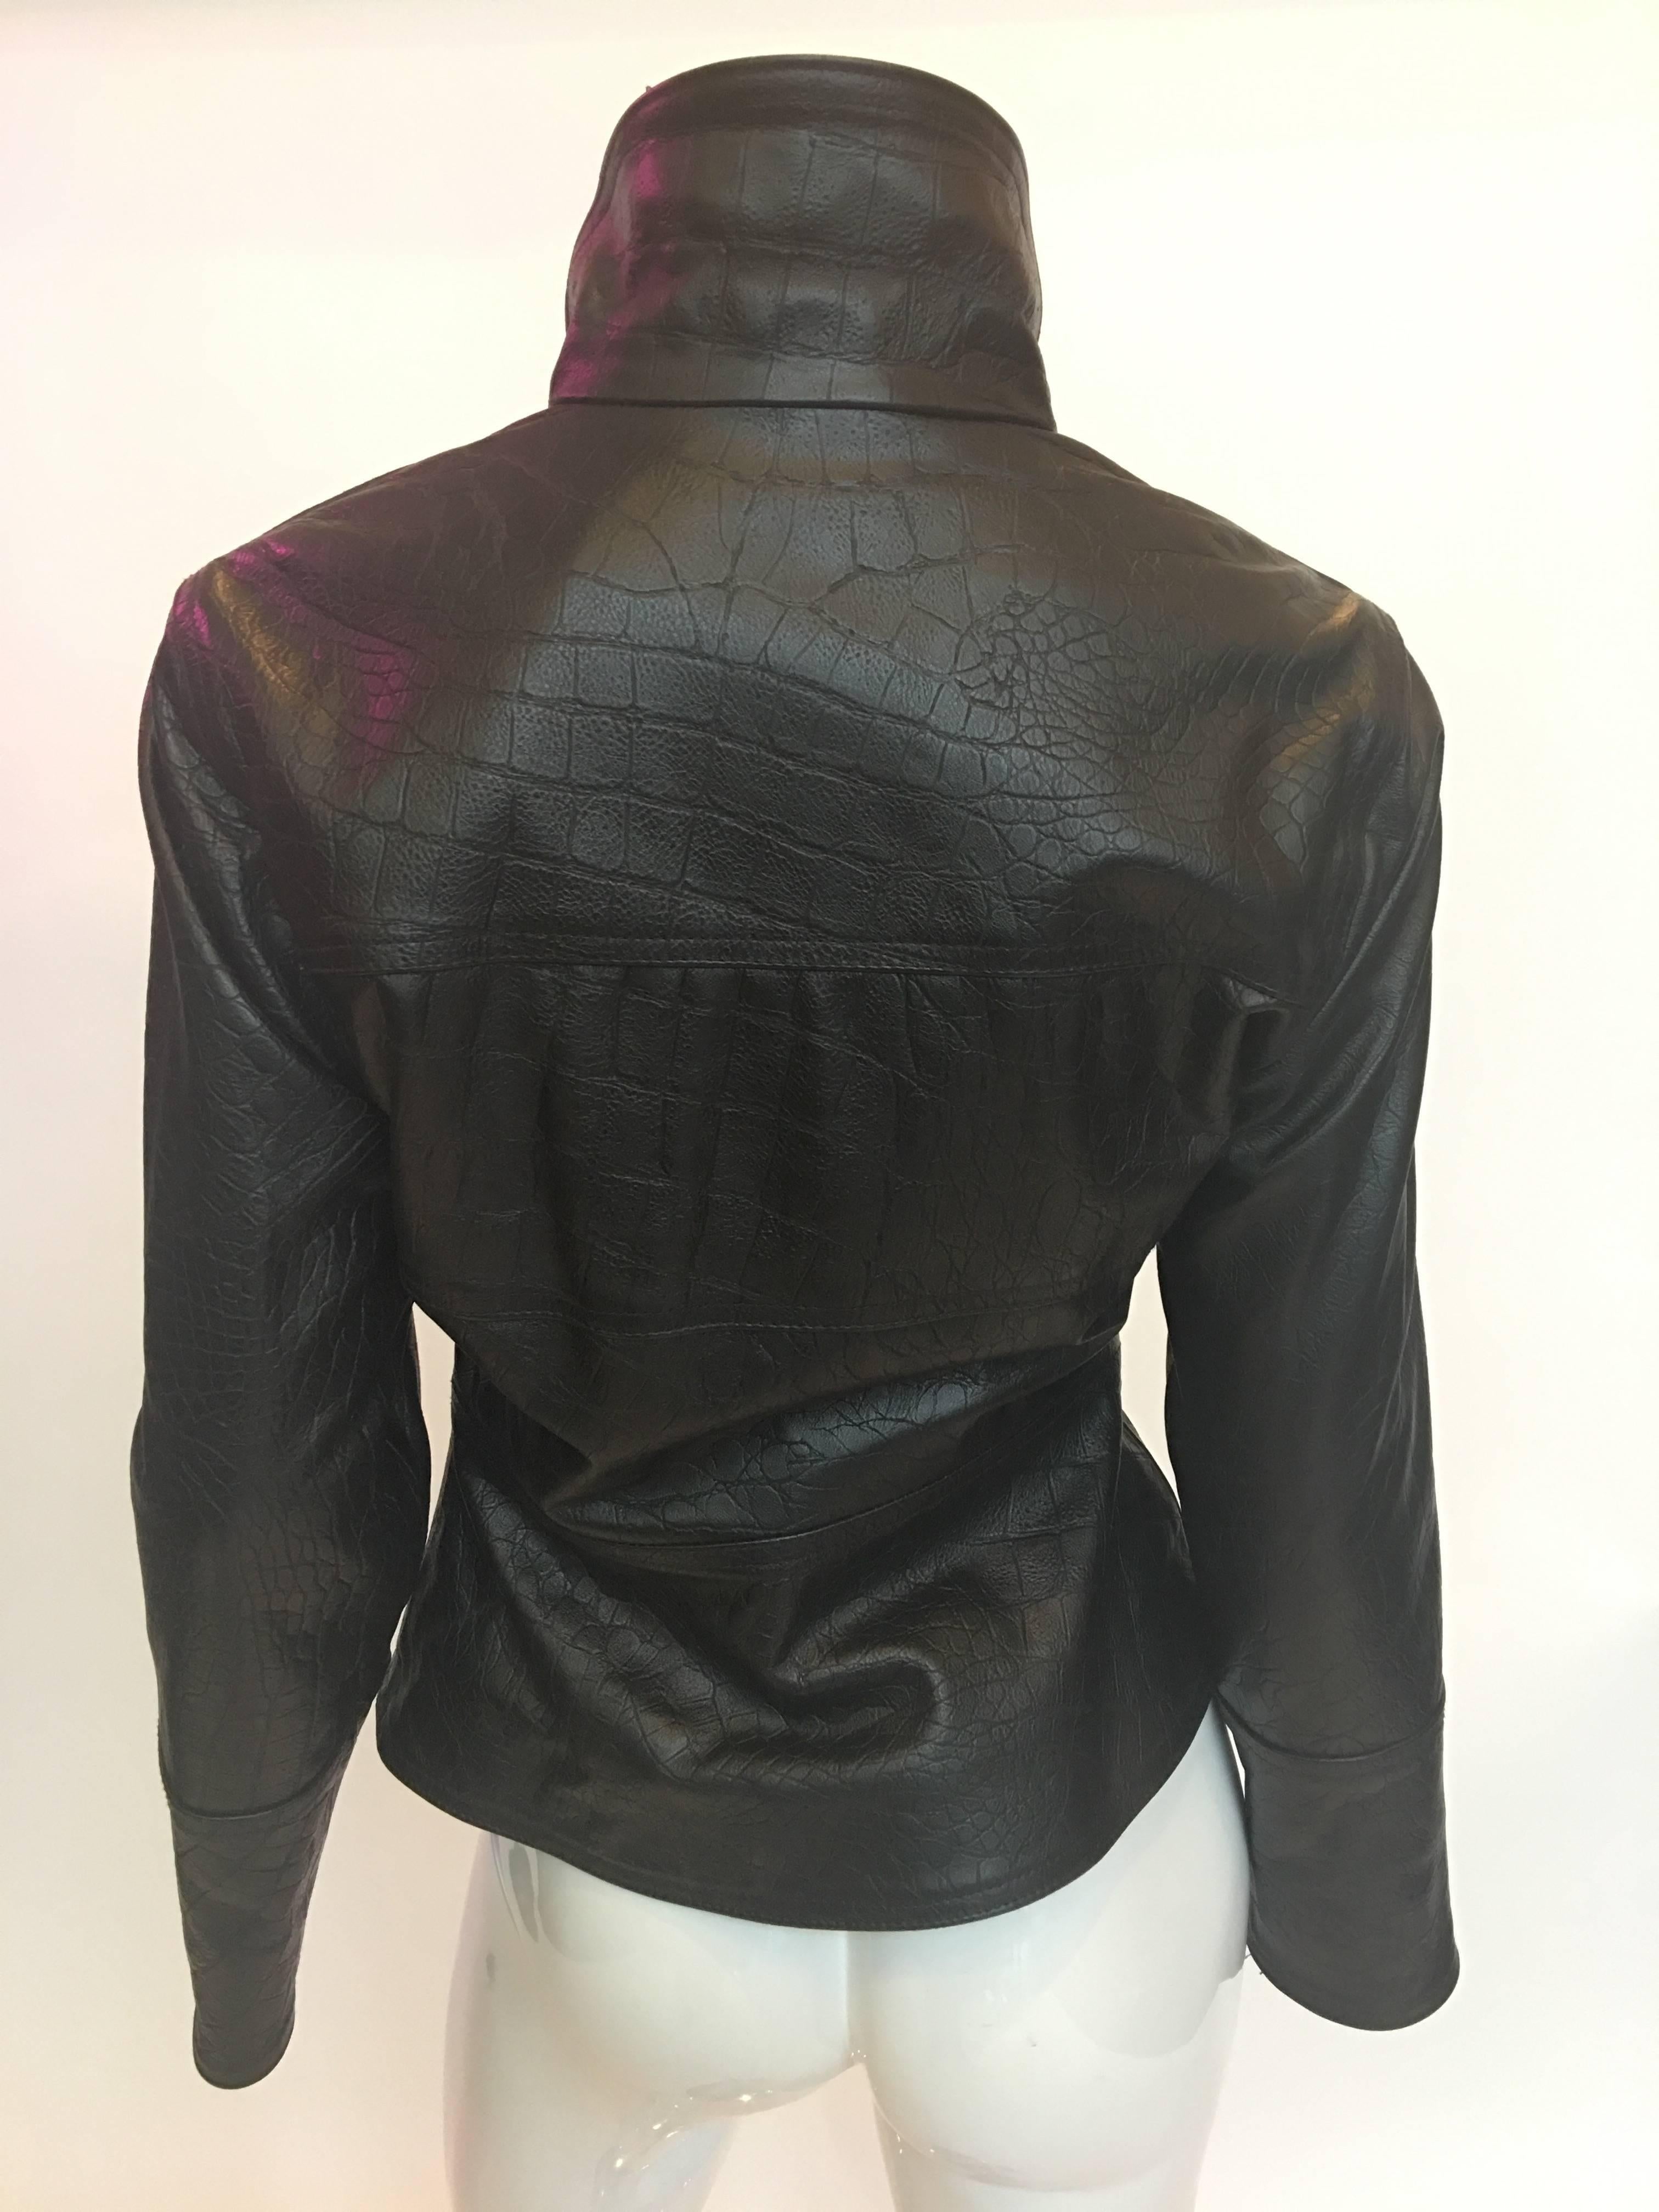 Versace 1990's Black Lizard Embossed Leather Jacket
*This is not actual lizard, but lizard stamped leather

Shoulders - seam to seam: 16